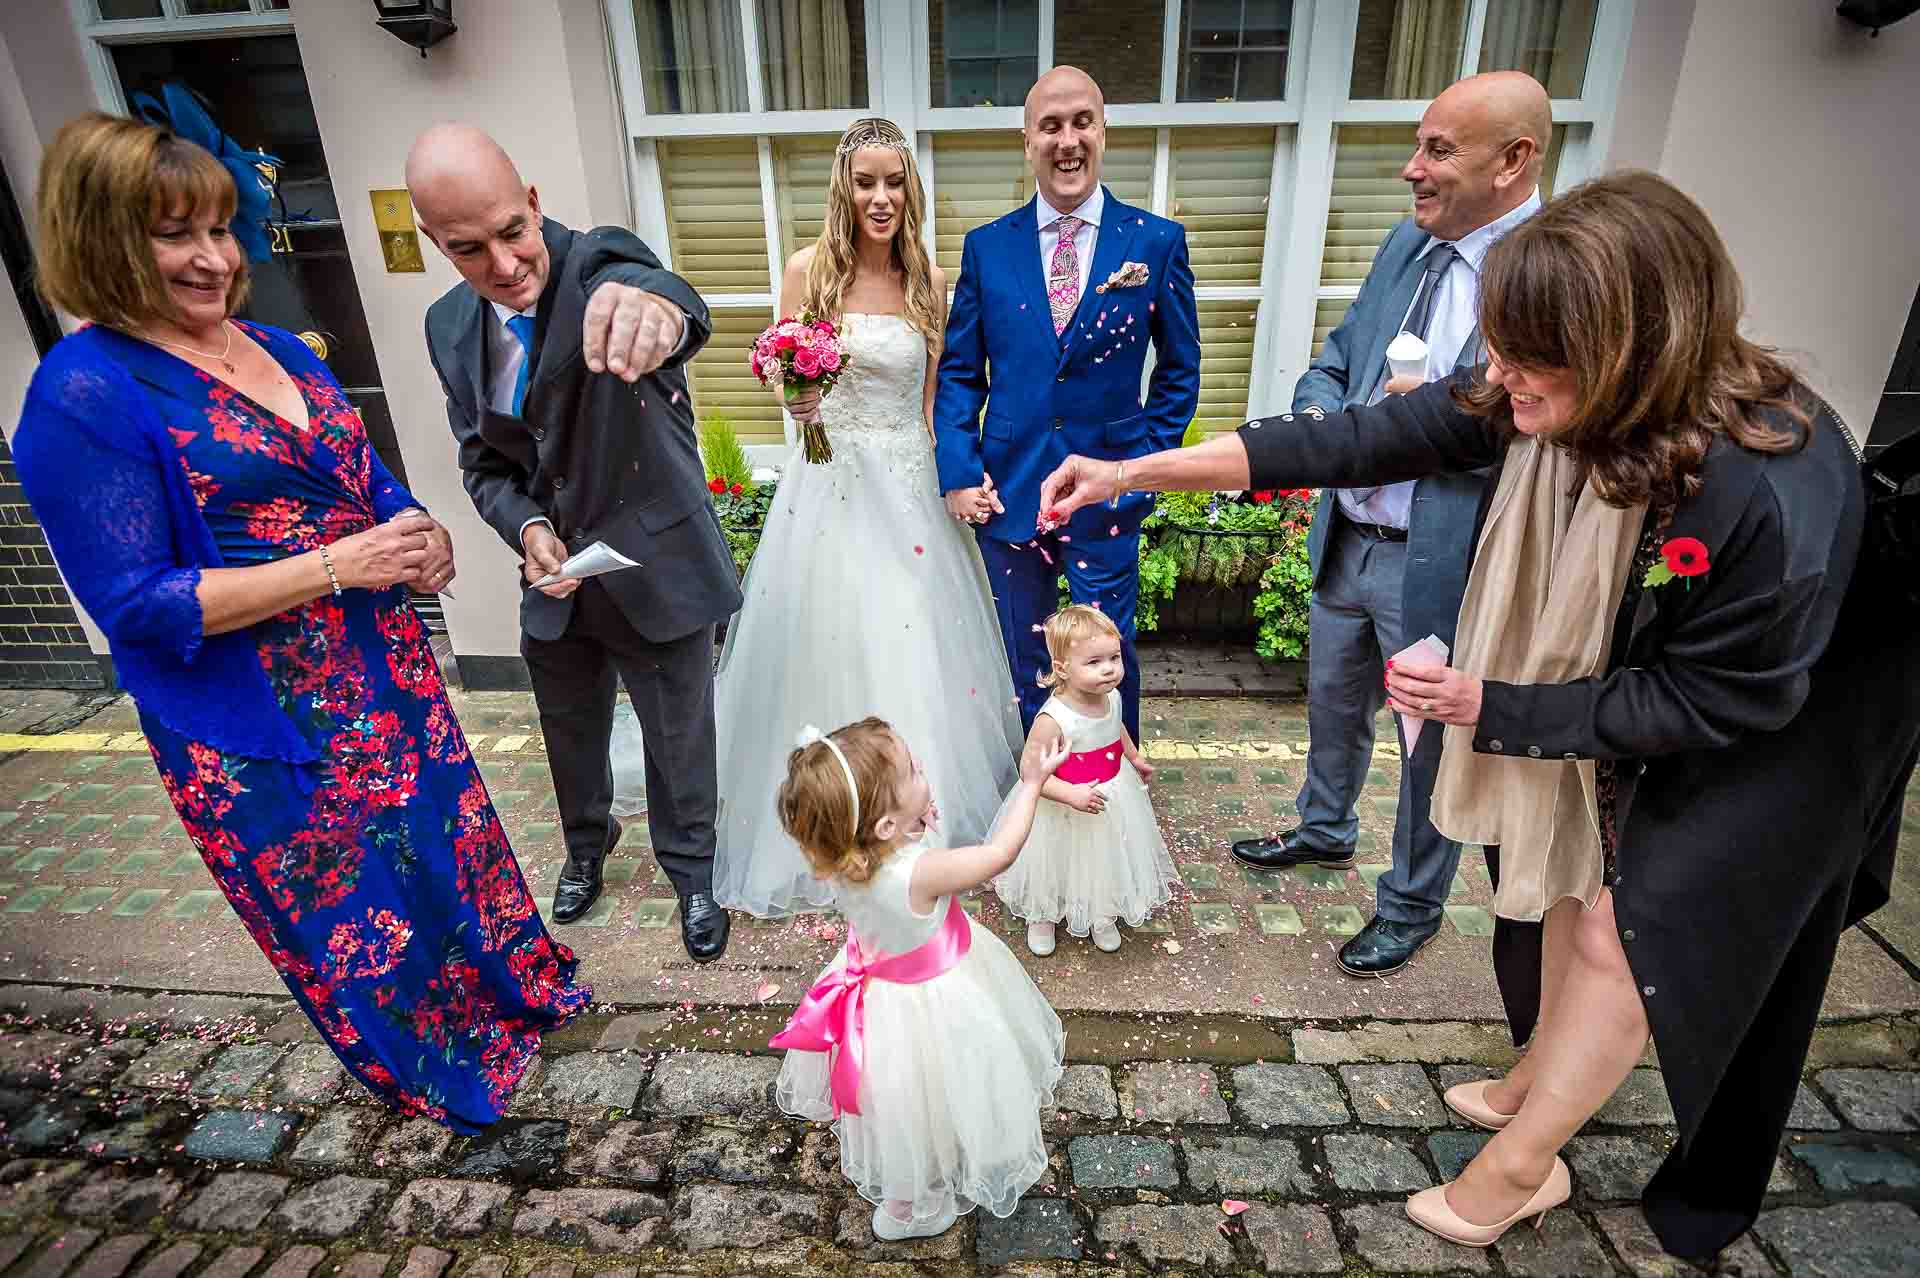 Toddlers in Confetti with Guests at Wedding